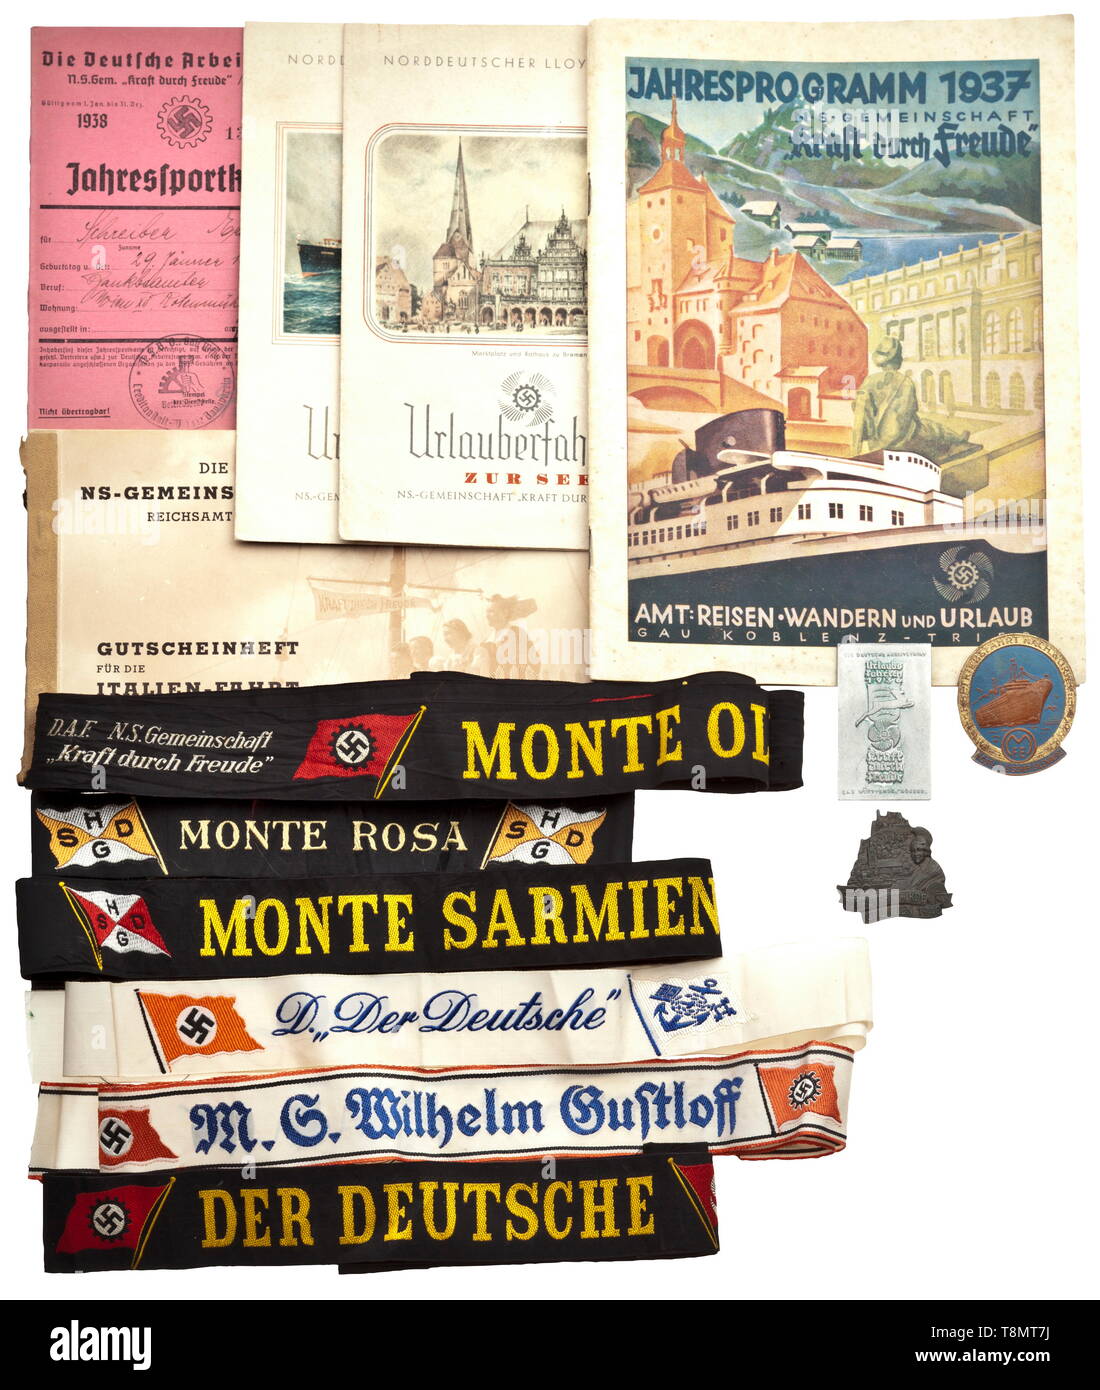 Eight cap bands from the (tr.) 'Strength Through Joy'-ships Three cap bands from the steamship 'Der Deutsche', one from 'M.S. Wilhelm Gustloff' (rare) as well as from the steamers 'Oceana, Monte Olivia, Monte Rosa, Monte Sarmiento'. The bands are all of full length (circa 95 cm) and in various base colours with different flags and symbols. Included are three badges from KdF trips and five documents including coupons and menus. historic, historical, 20th century, German Labour Front, German Labor Front, Germany, NS, National Socialism, Nazism, Third Reich, German Reich, orga, Editorial-Use-Only Stock Photo